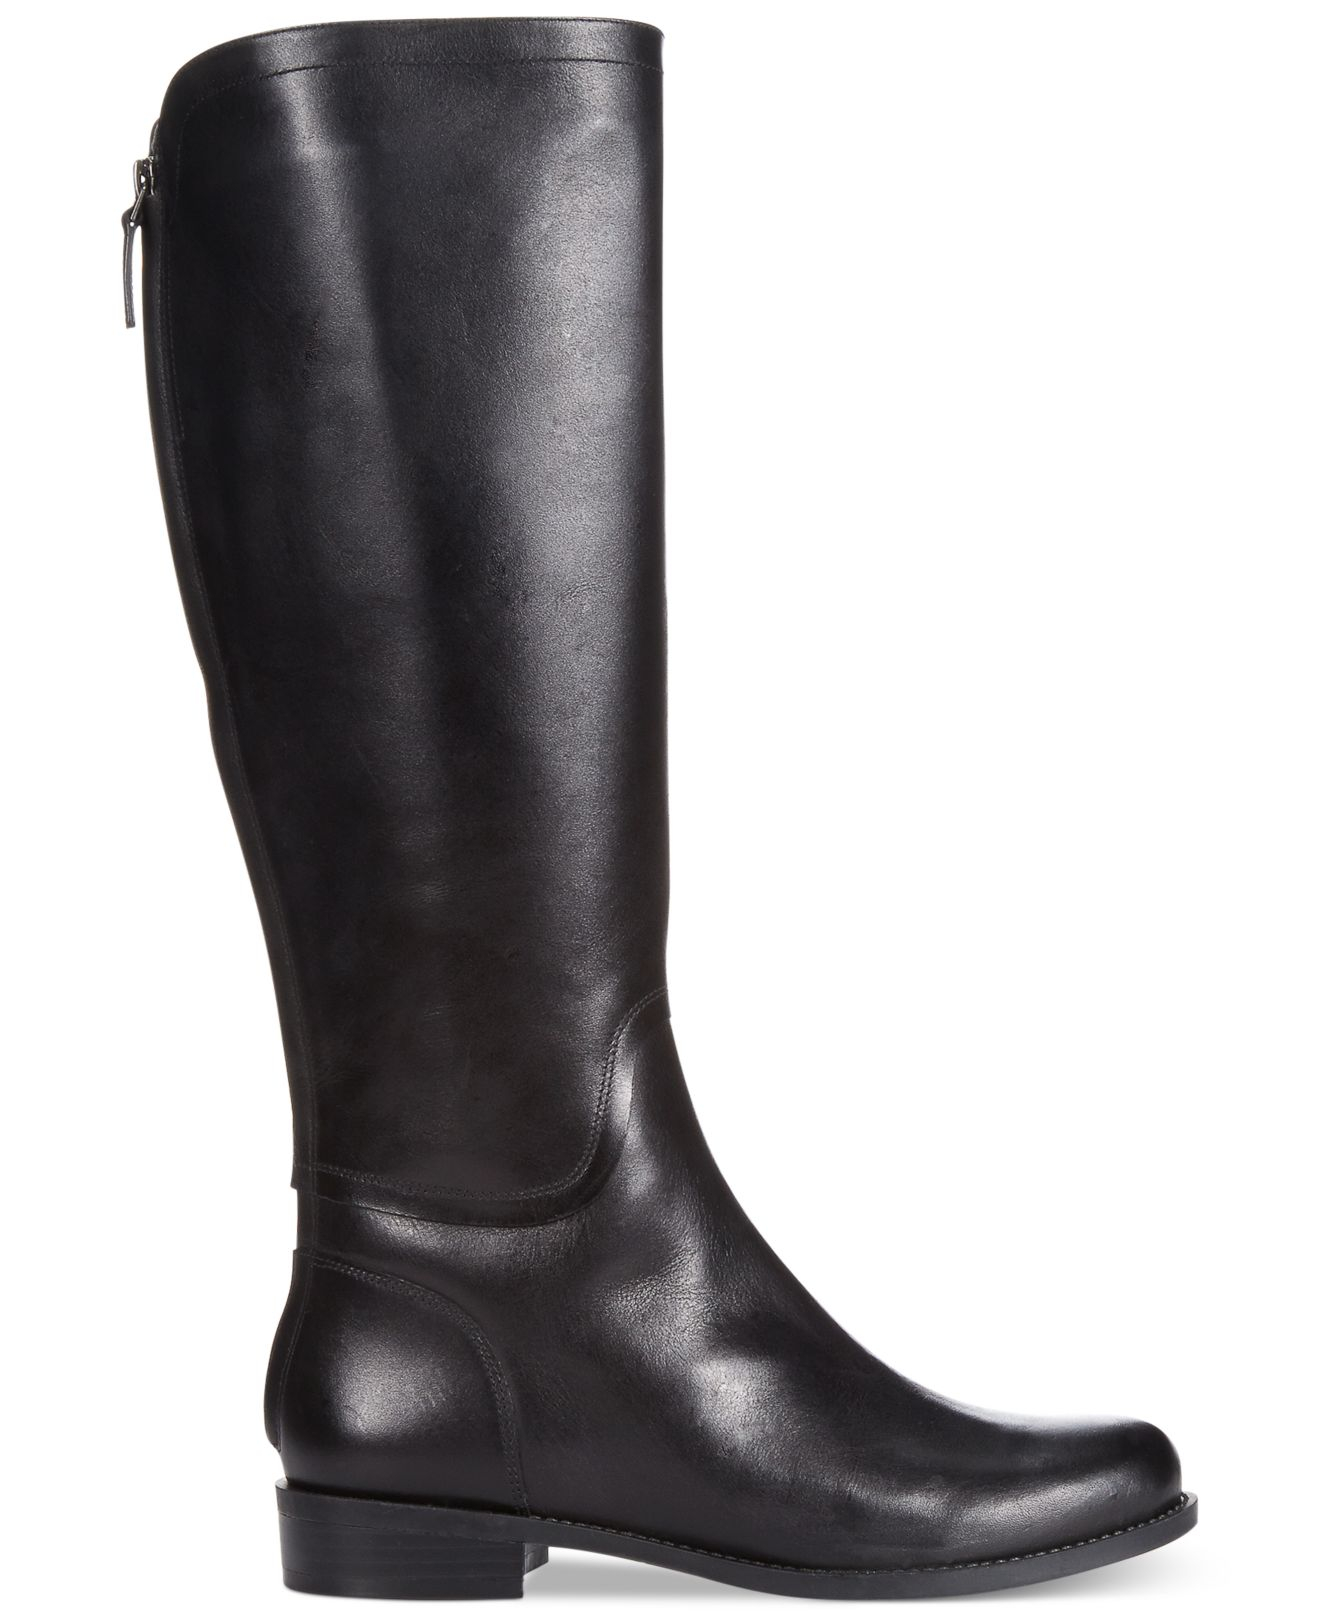 Nine west Contigua Tall Riding Boots in Black | Lyst